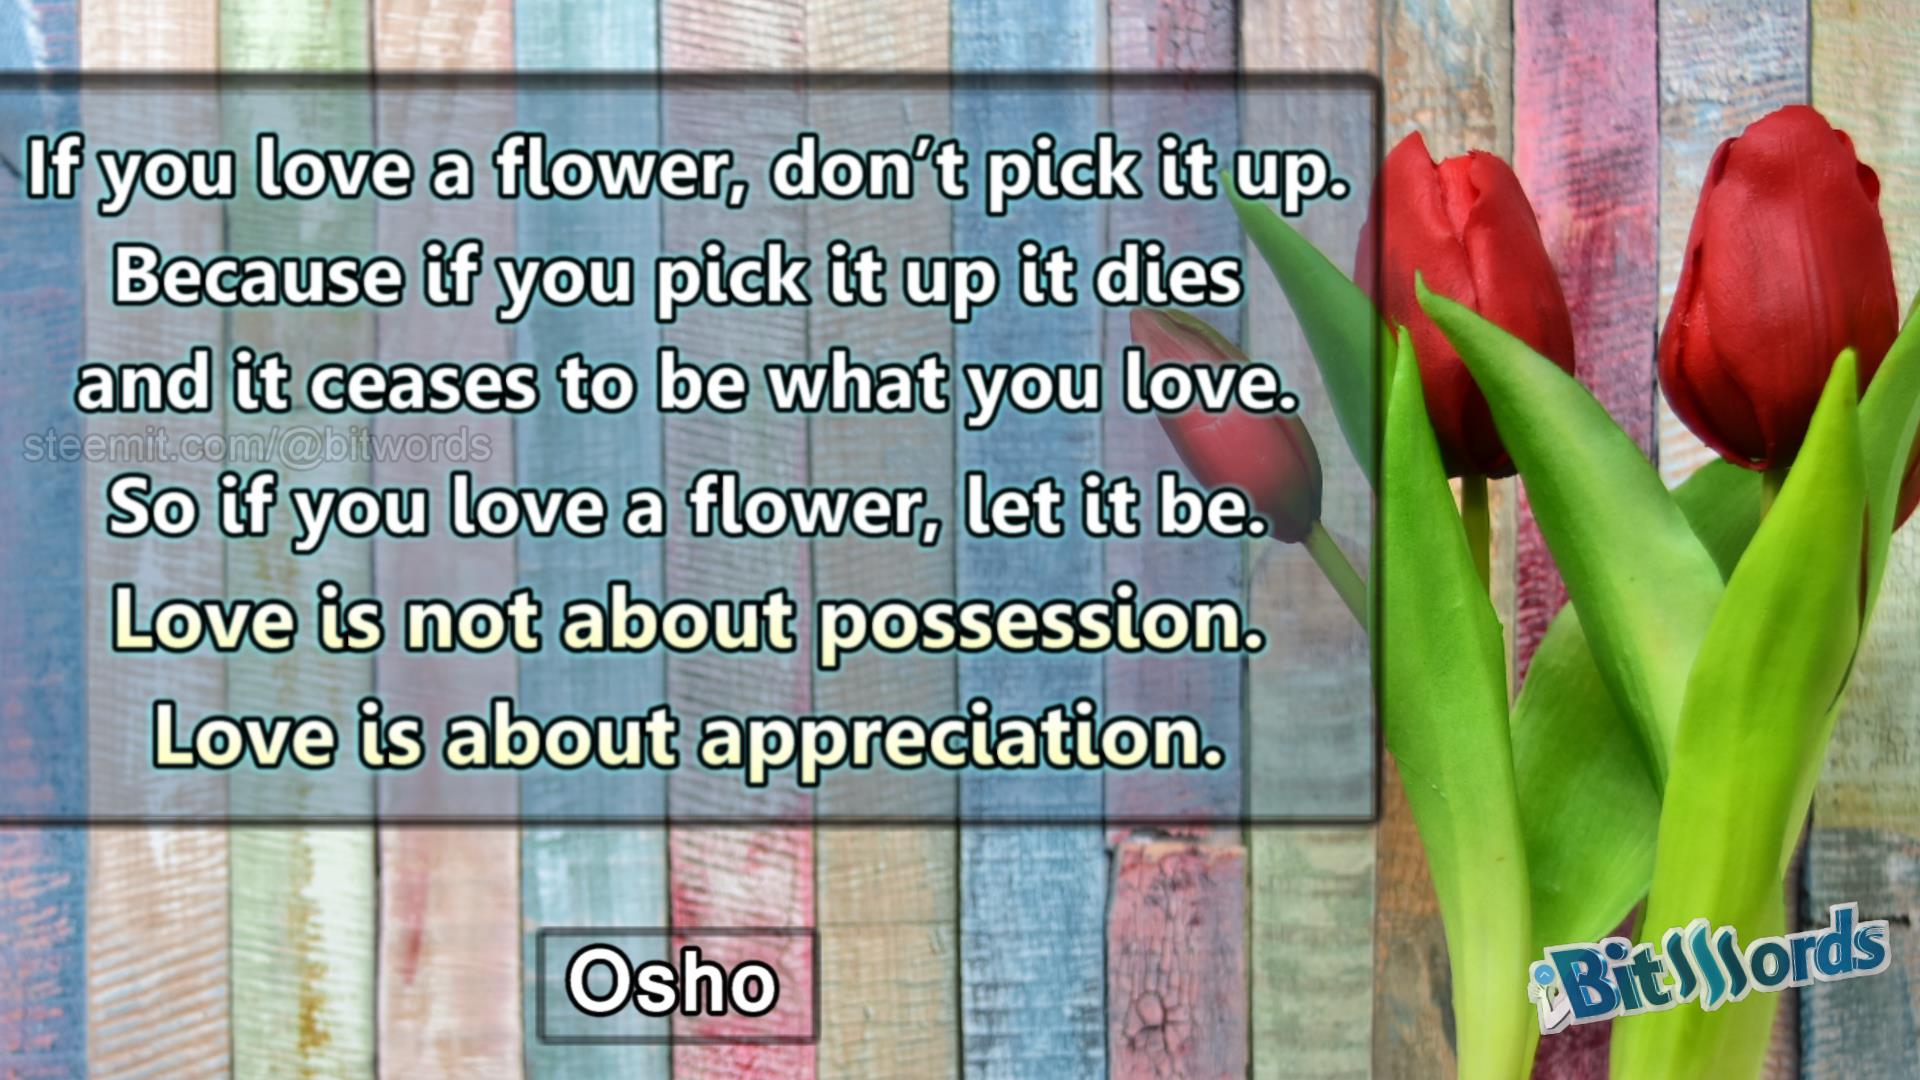 bitwords steemit quote of the day osho love isnt about possesion is about appreiation.jpg